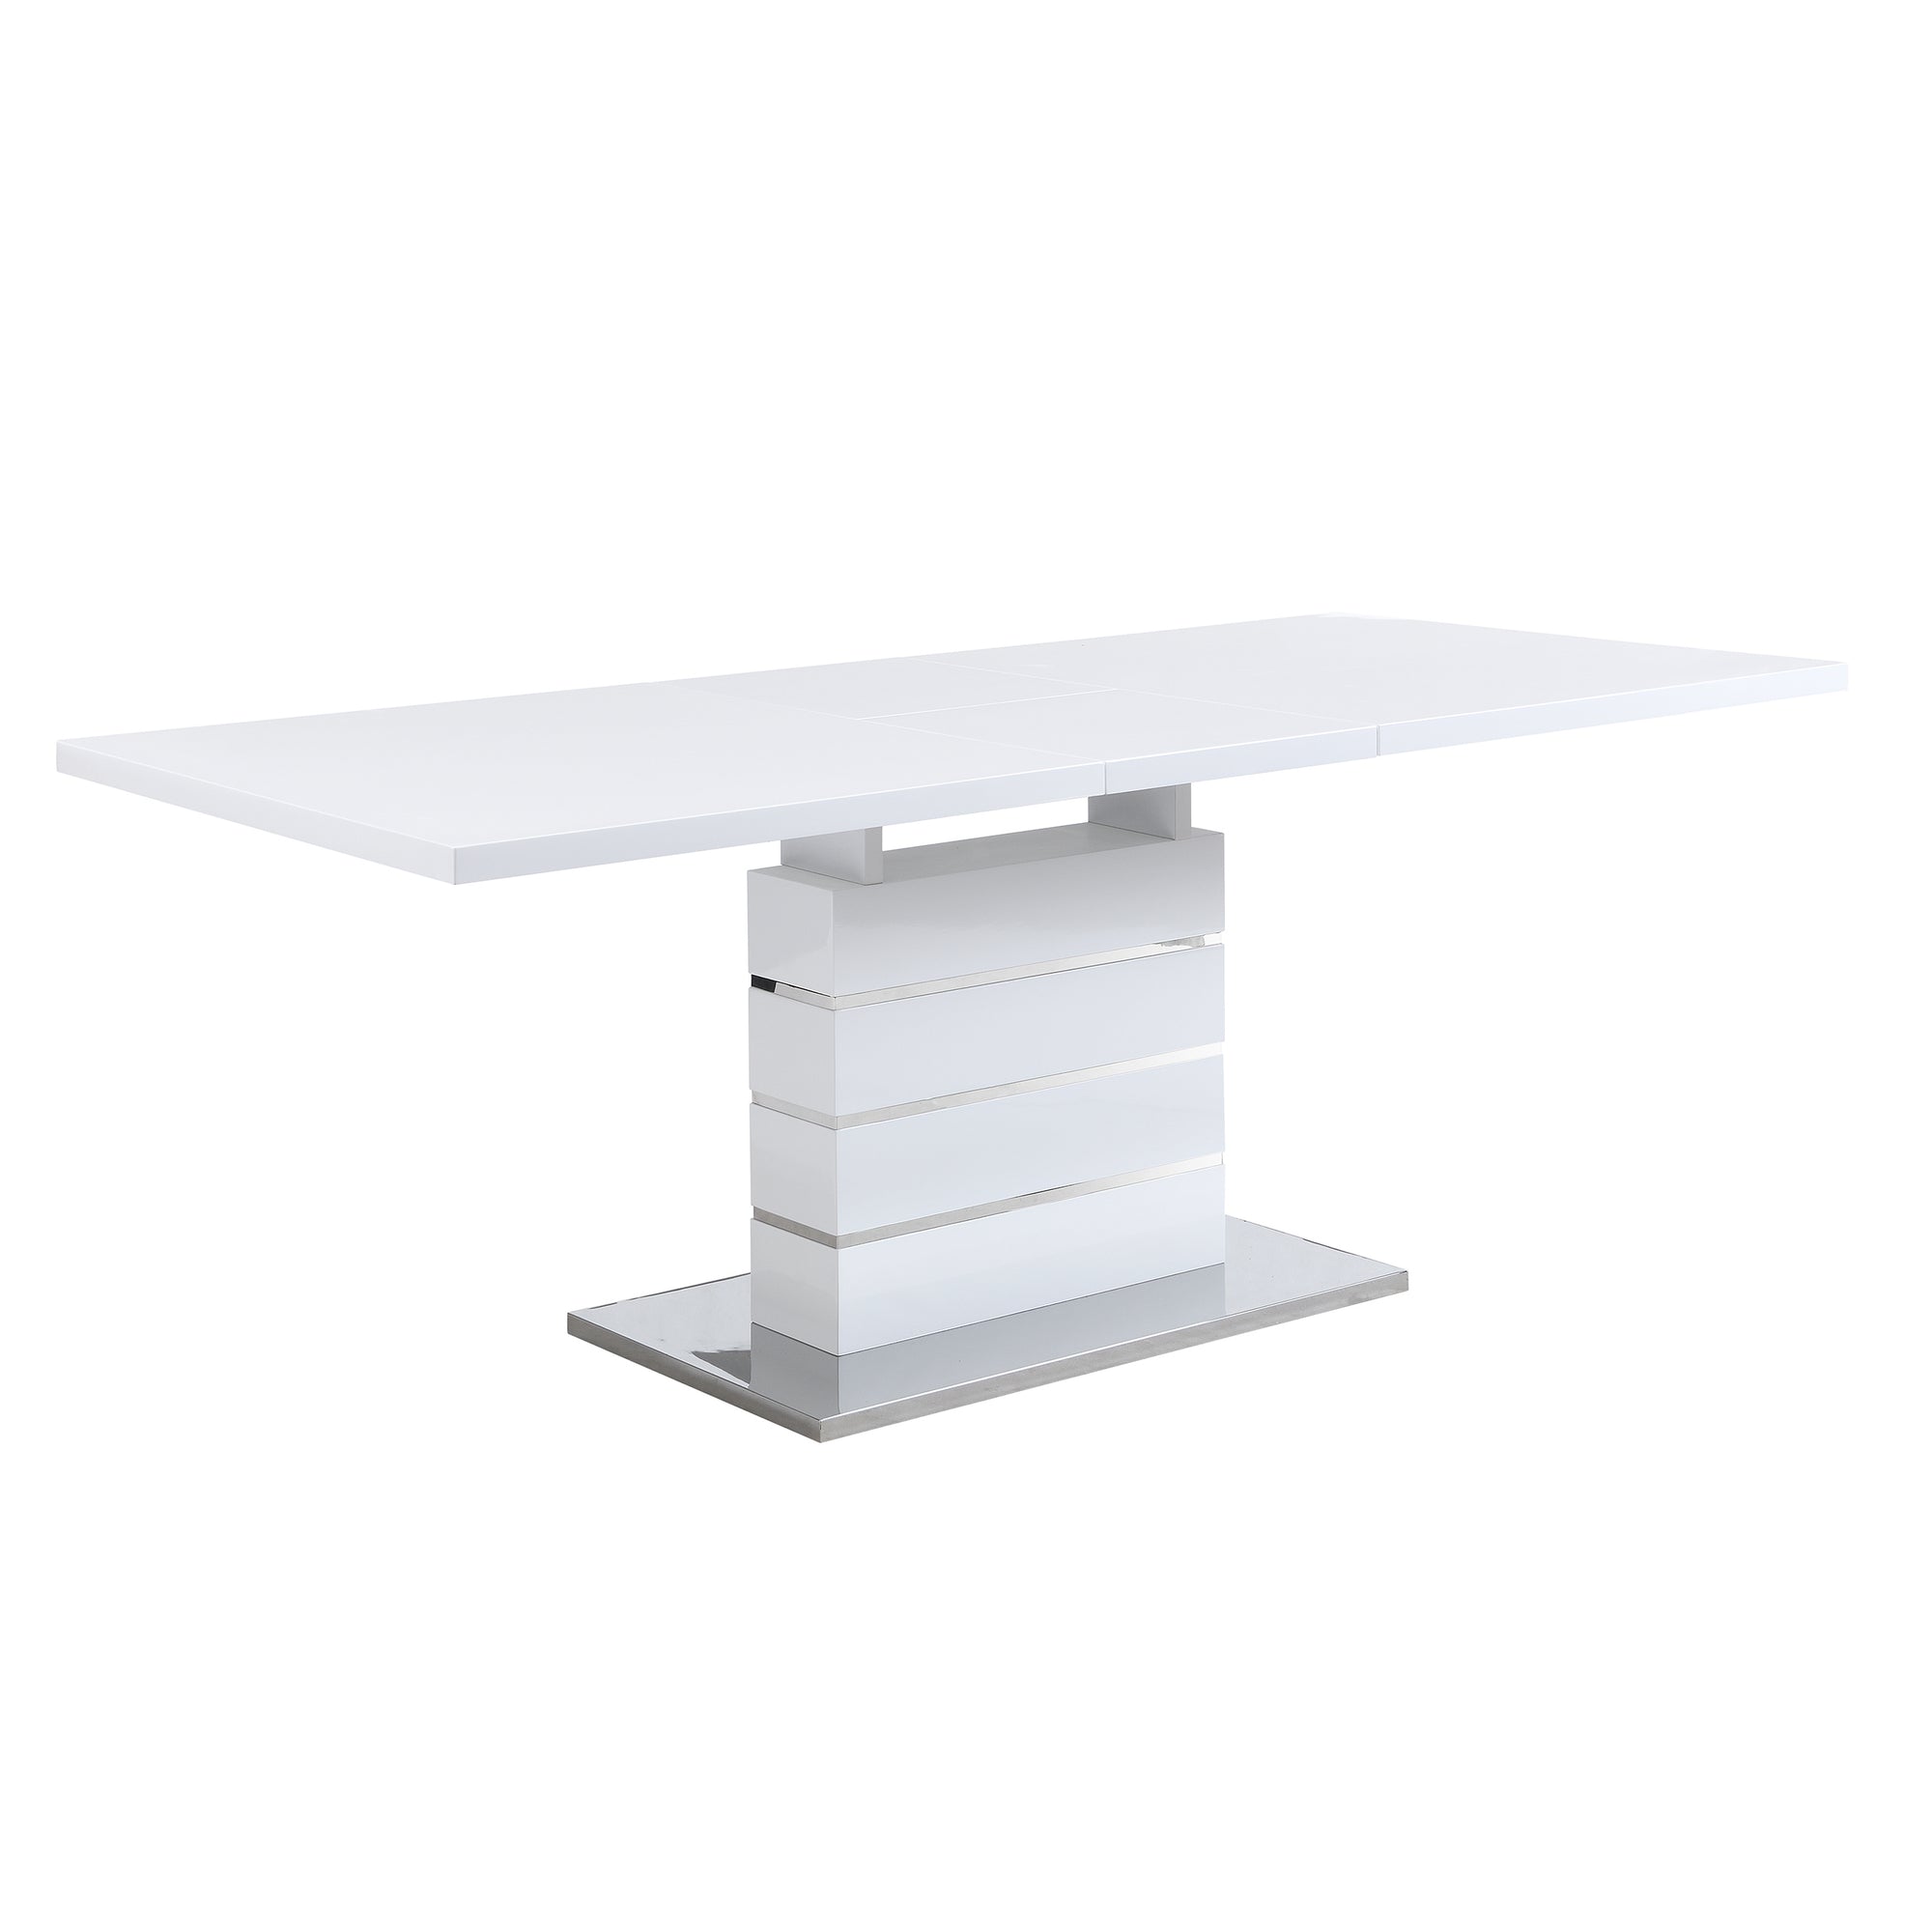 Hayne High Gloss White Extending Dining Table 6 to 8 Seater